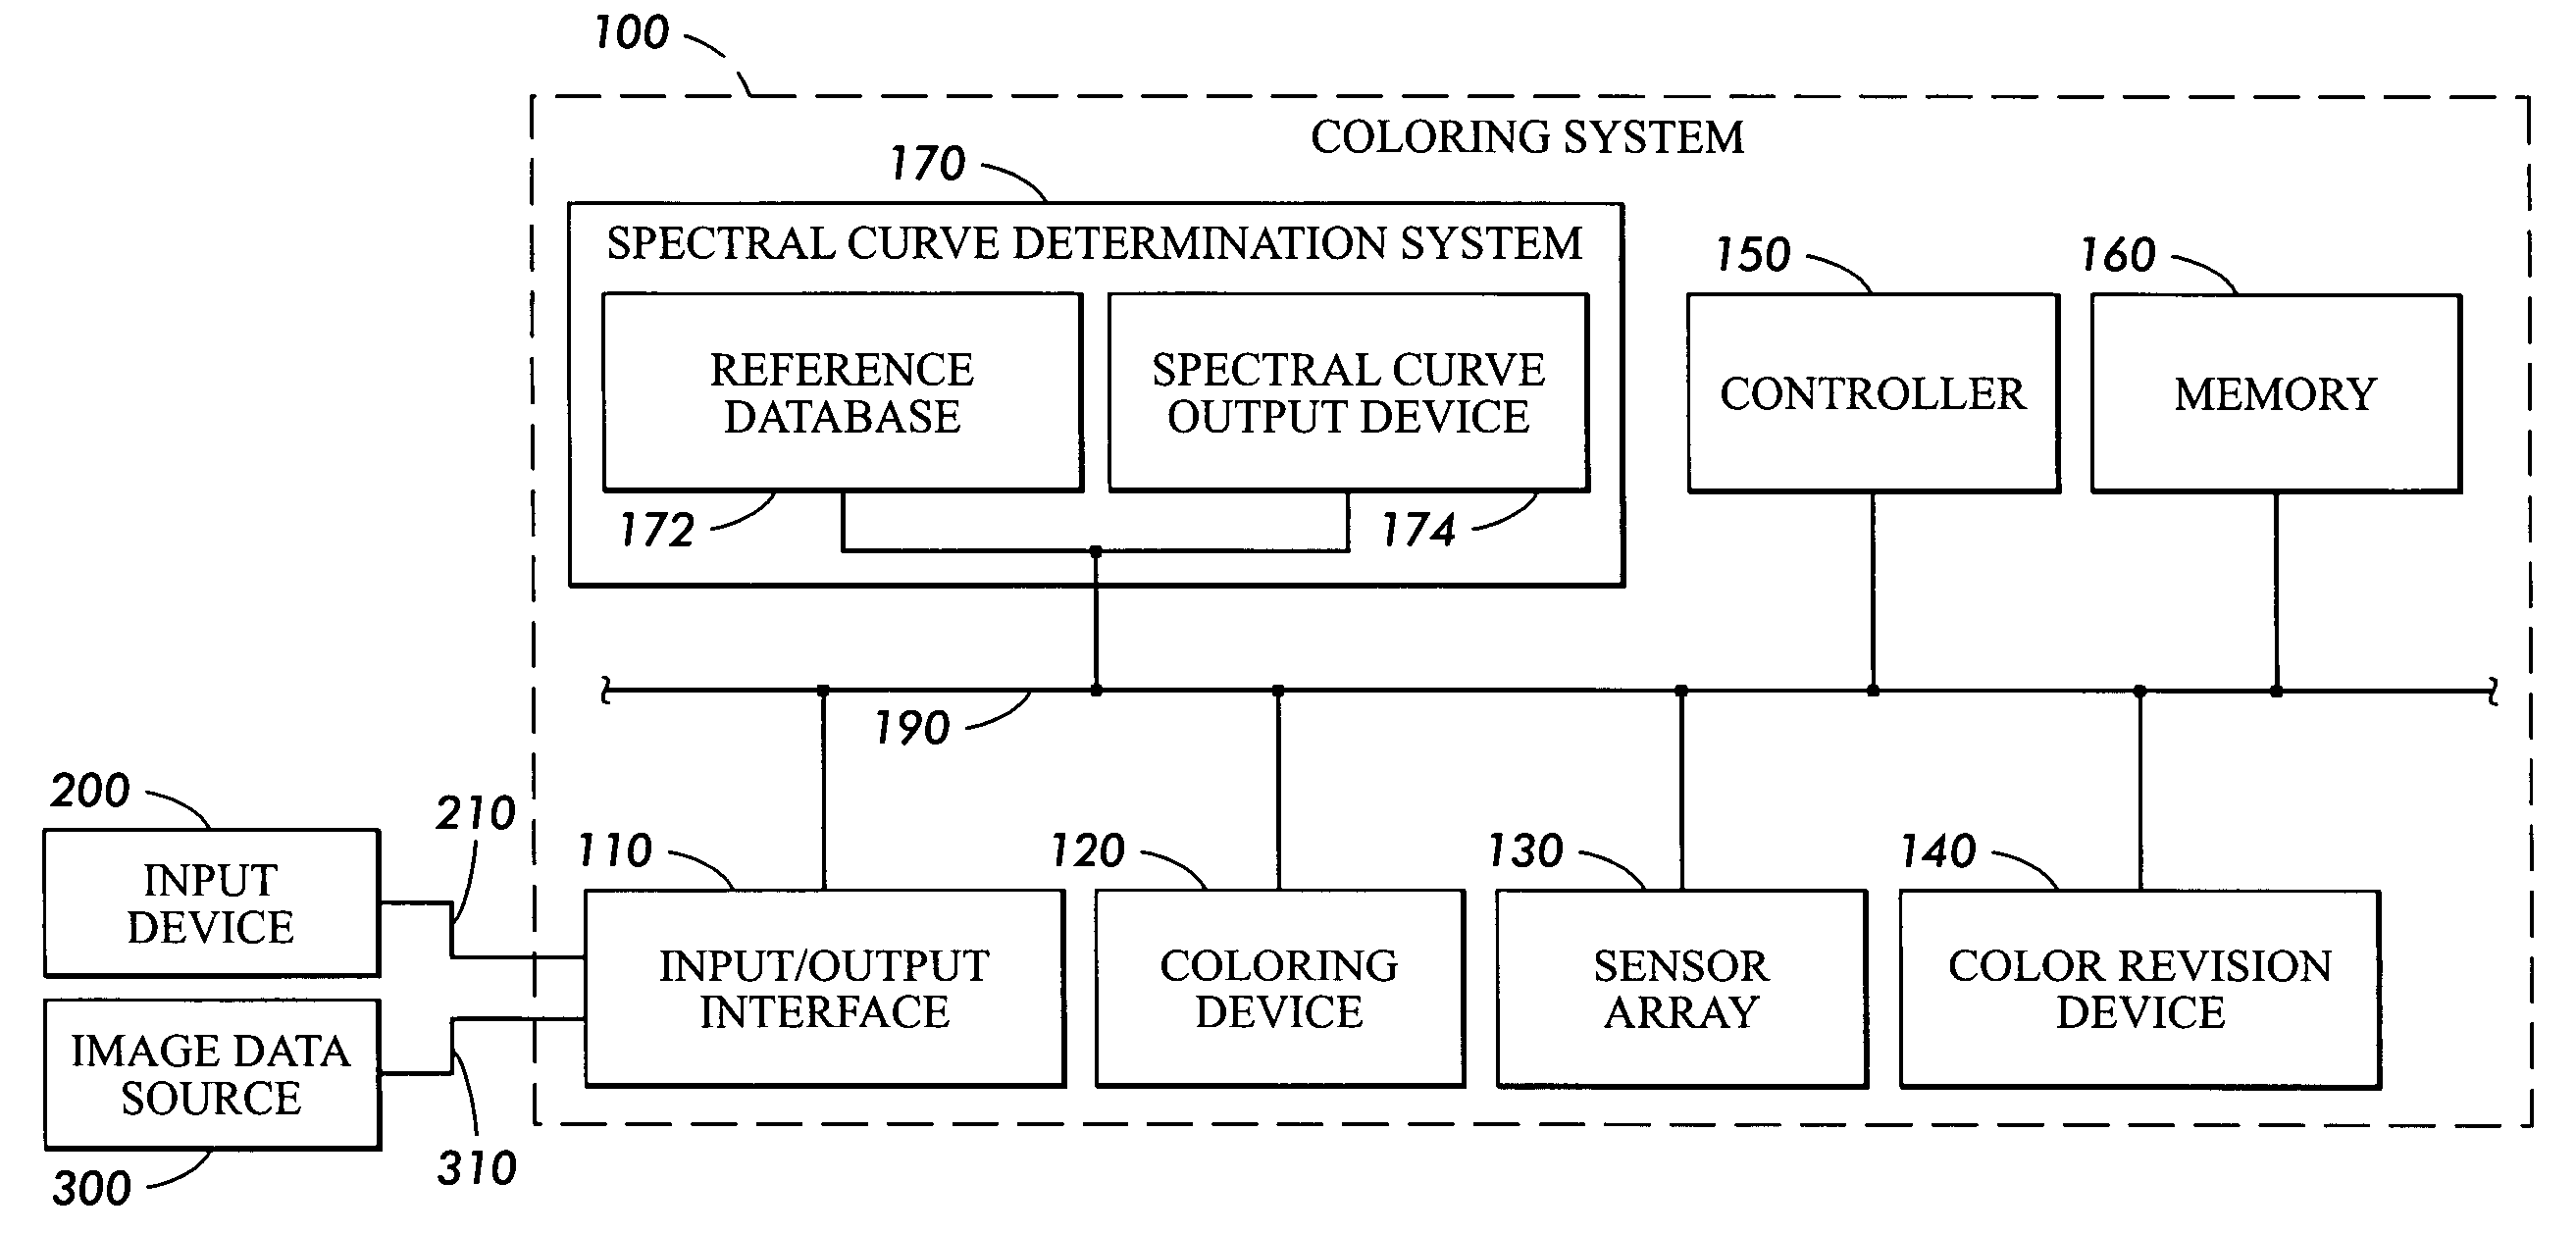 Reference database and method for determining spectra using measurements from an LED color sensor, and method of generating a reference database